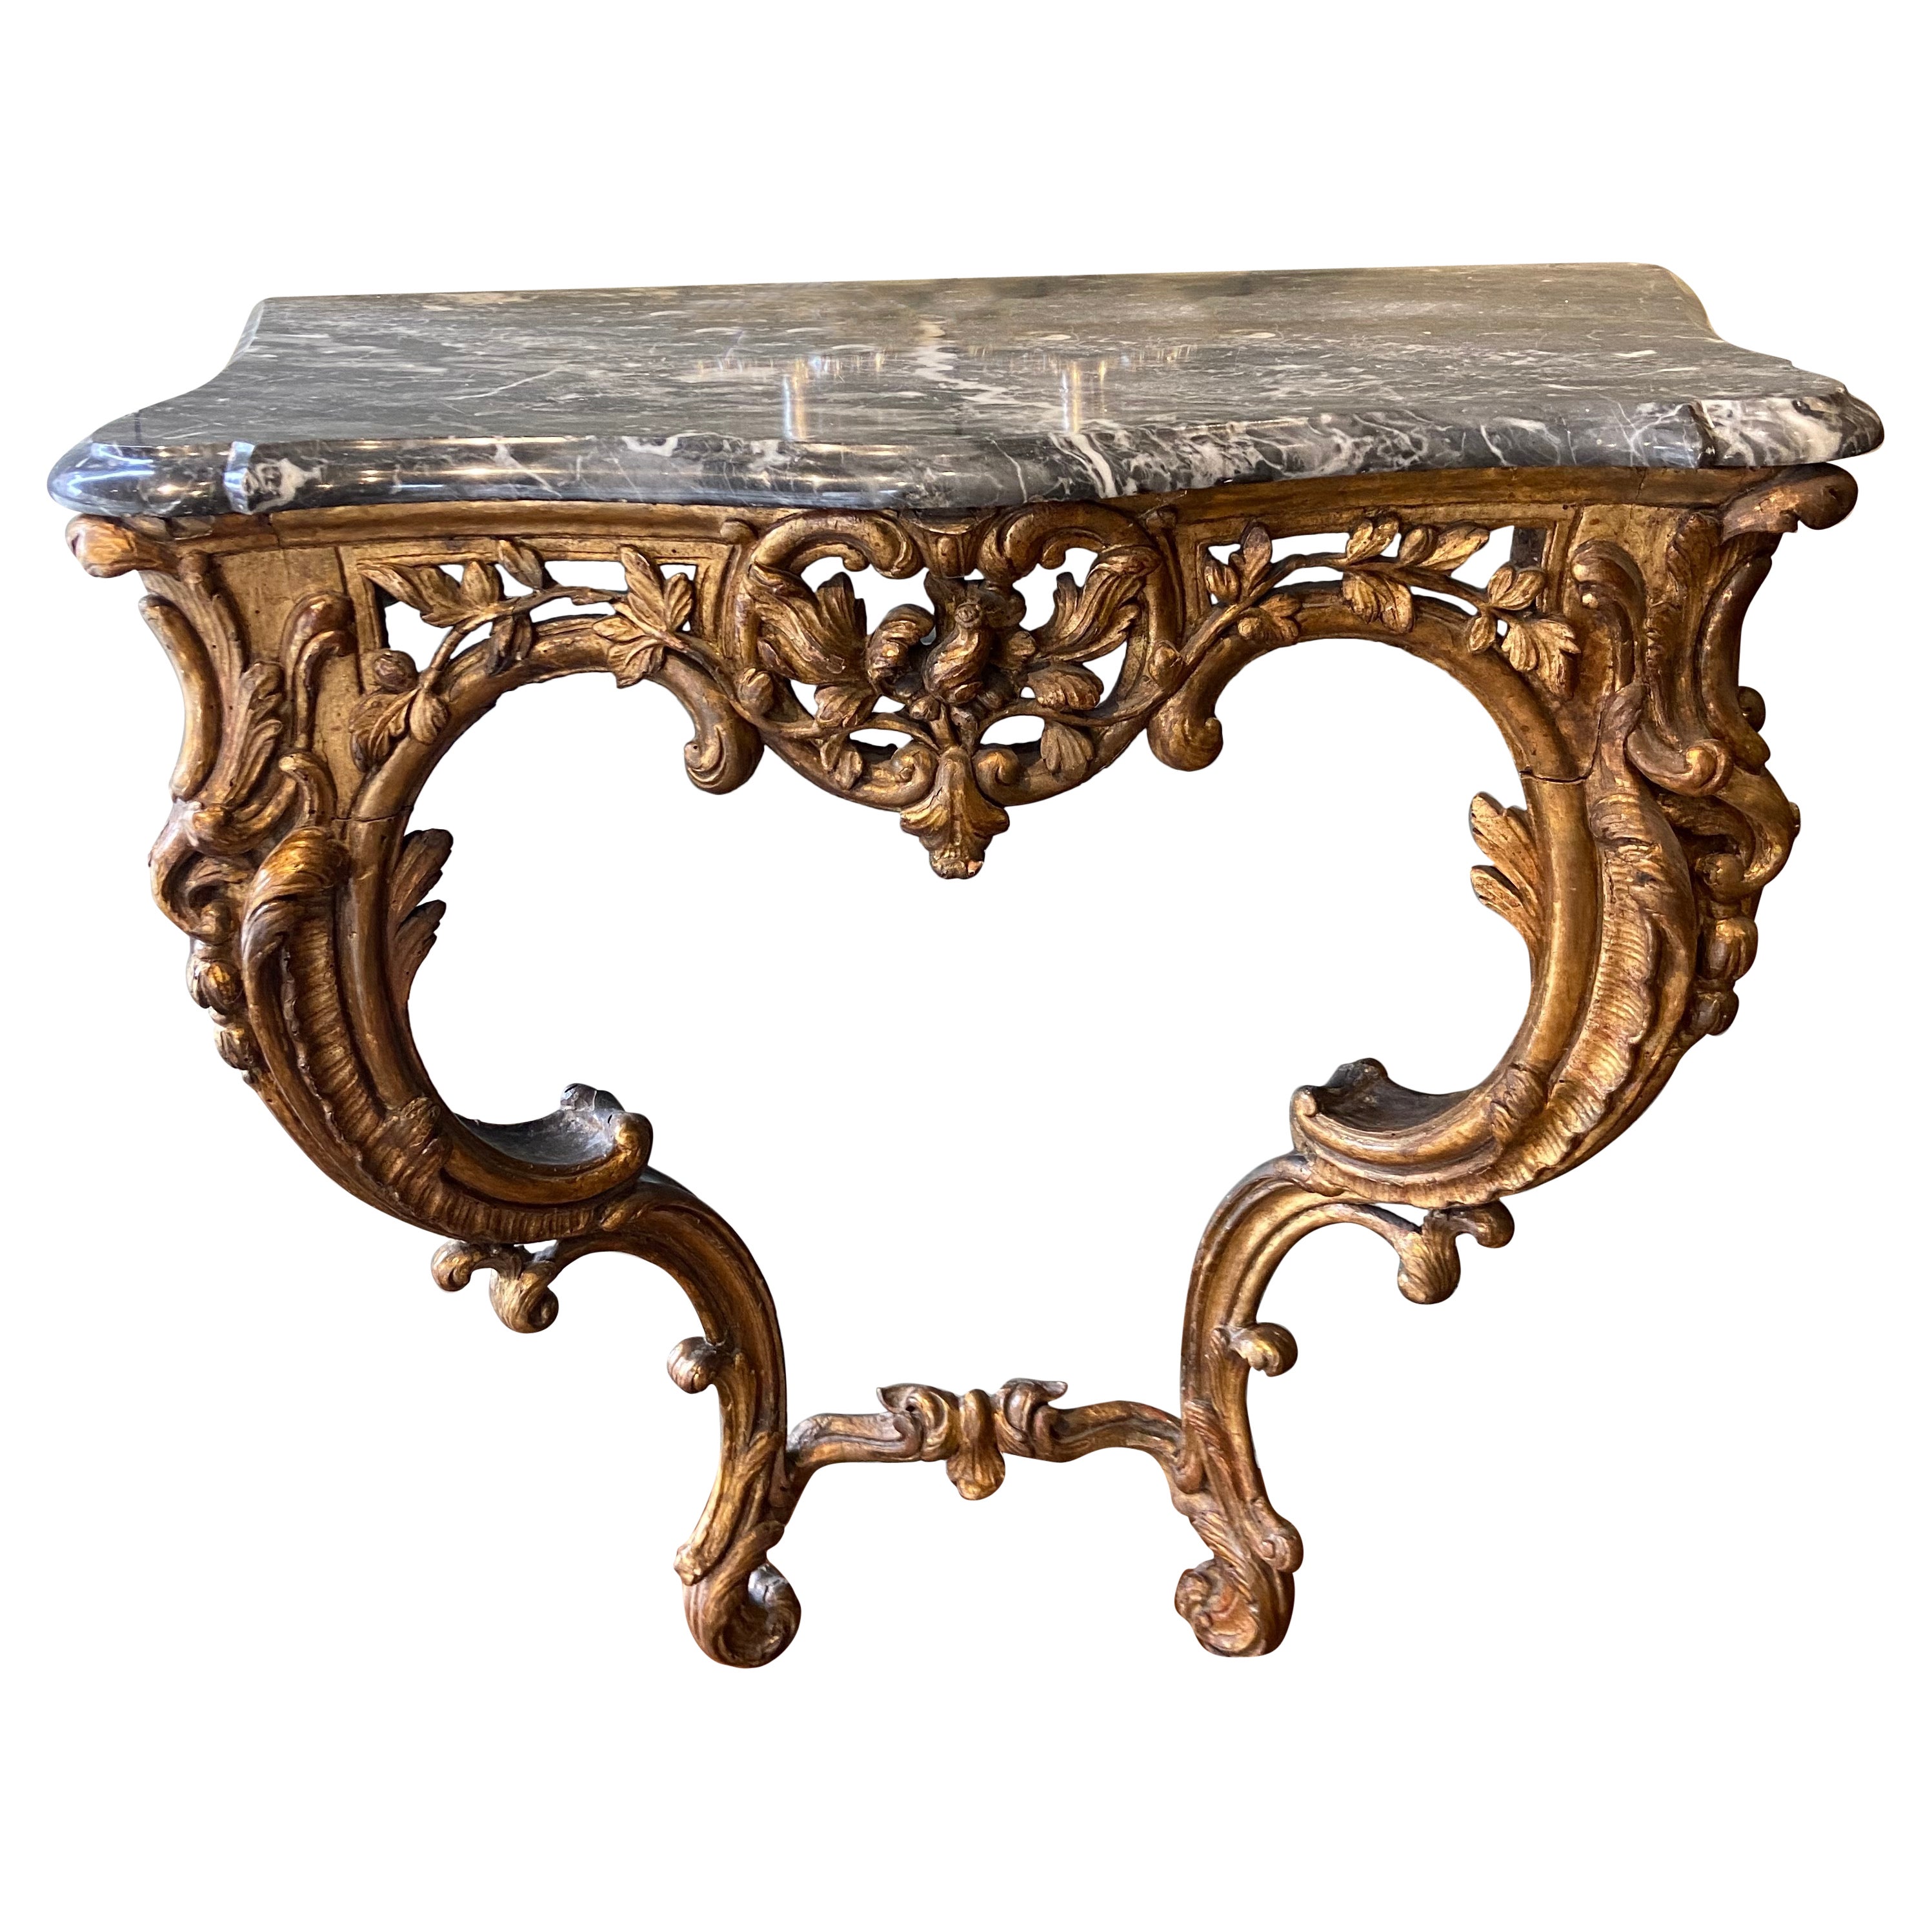 Italian Gilt-Wood Serpentine Console Table 'Mid 18th Century' For Sale